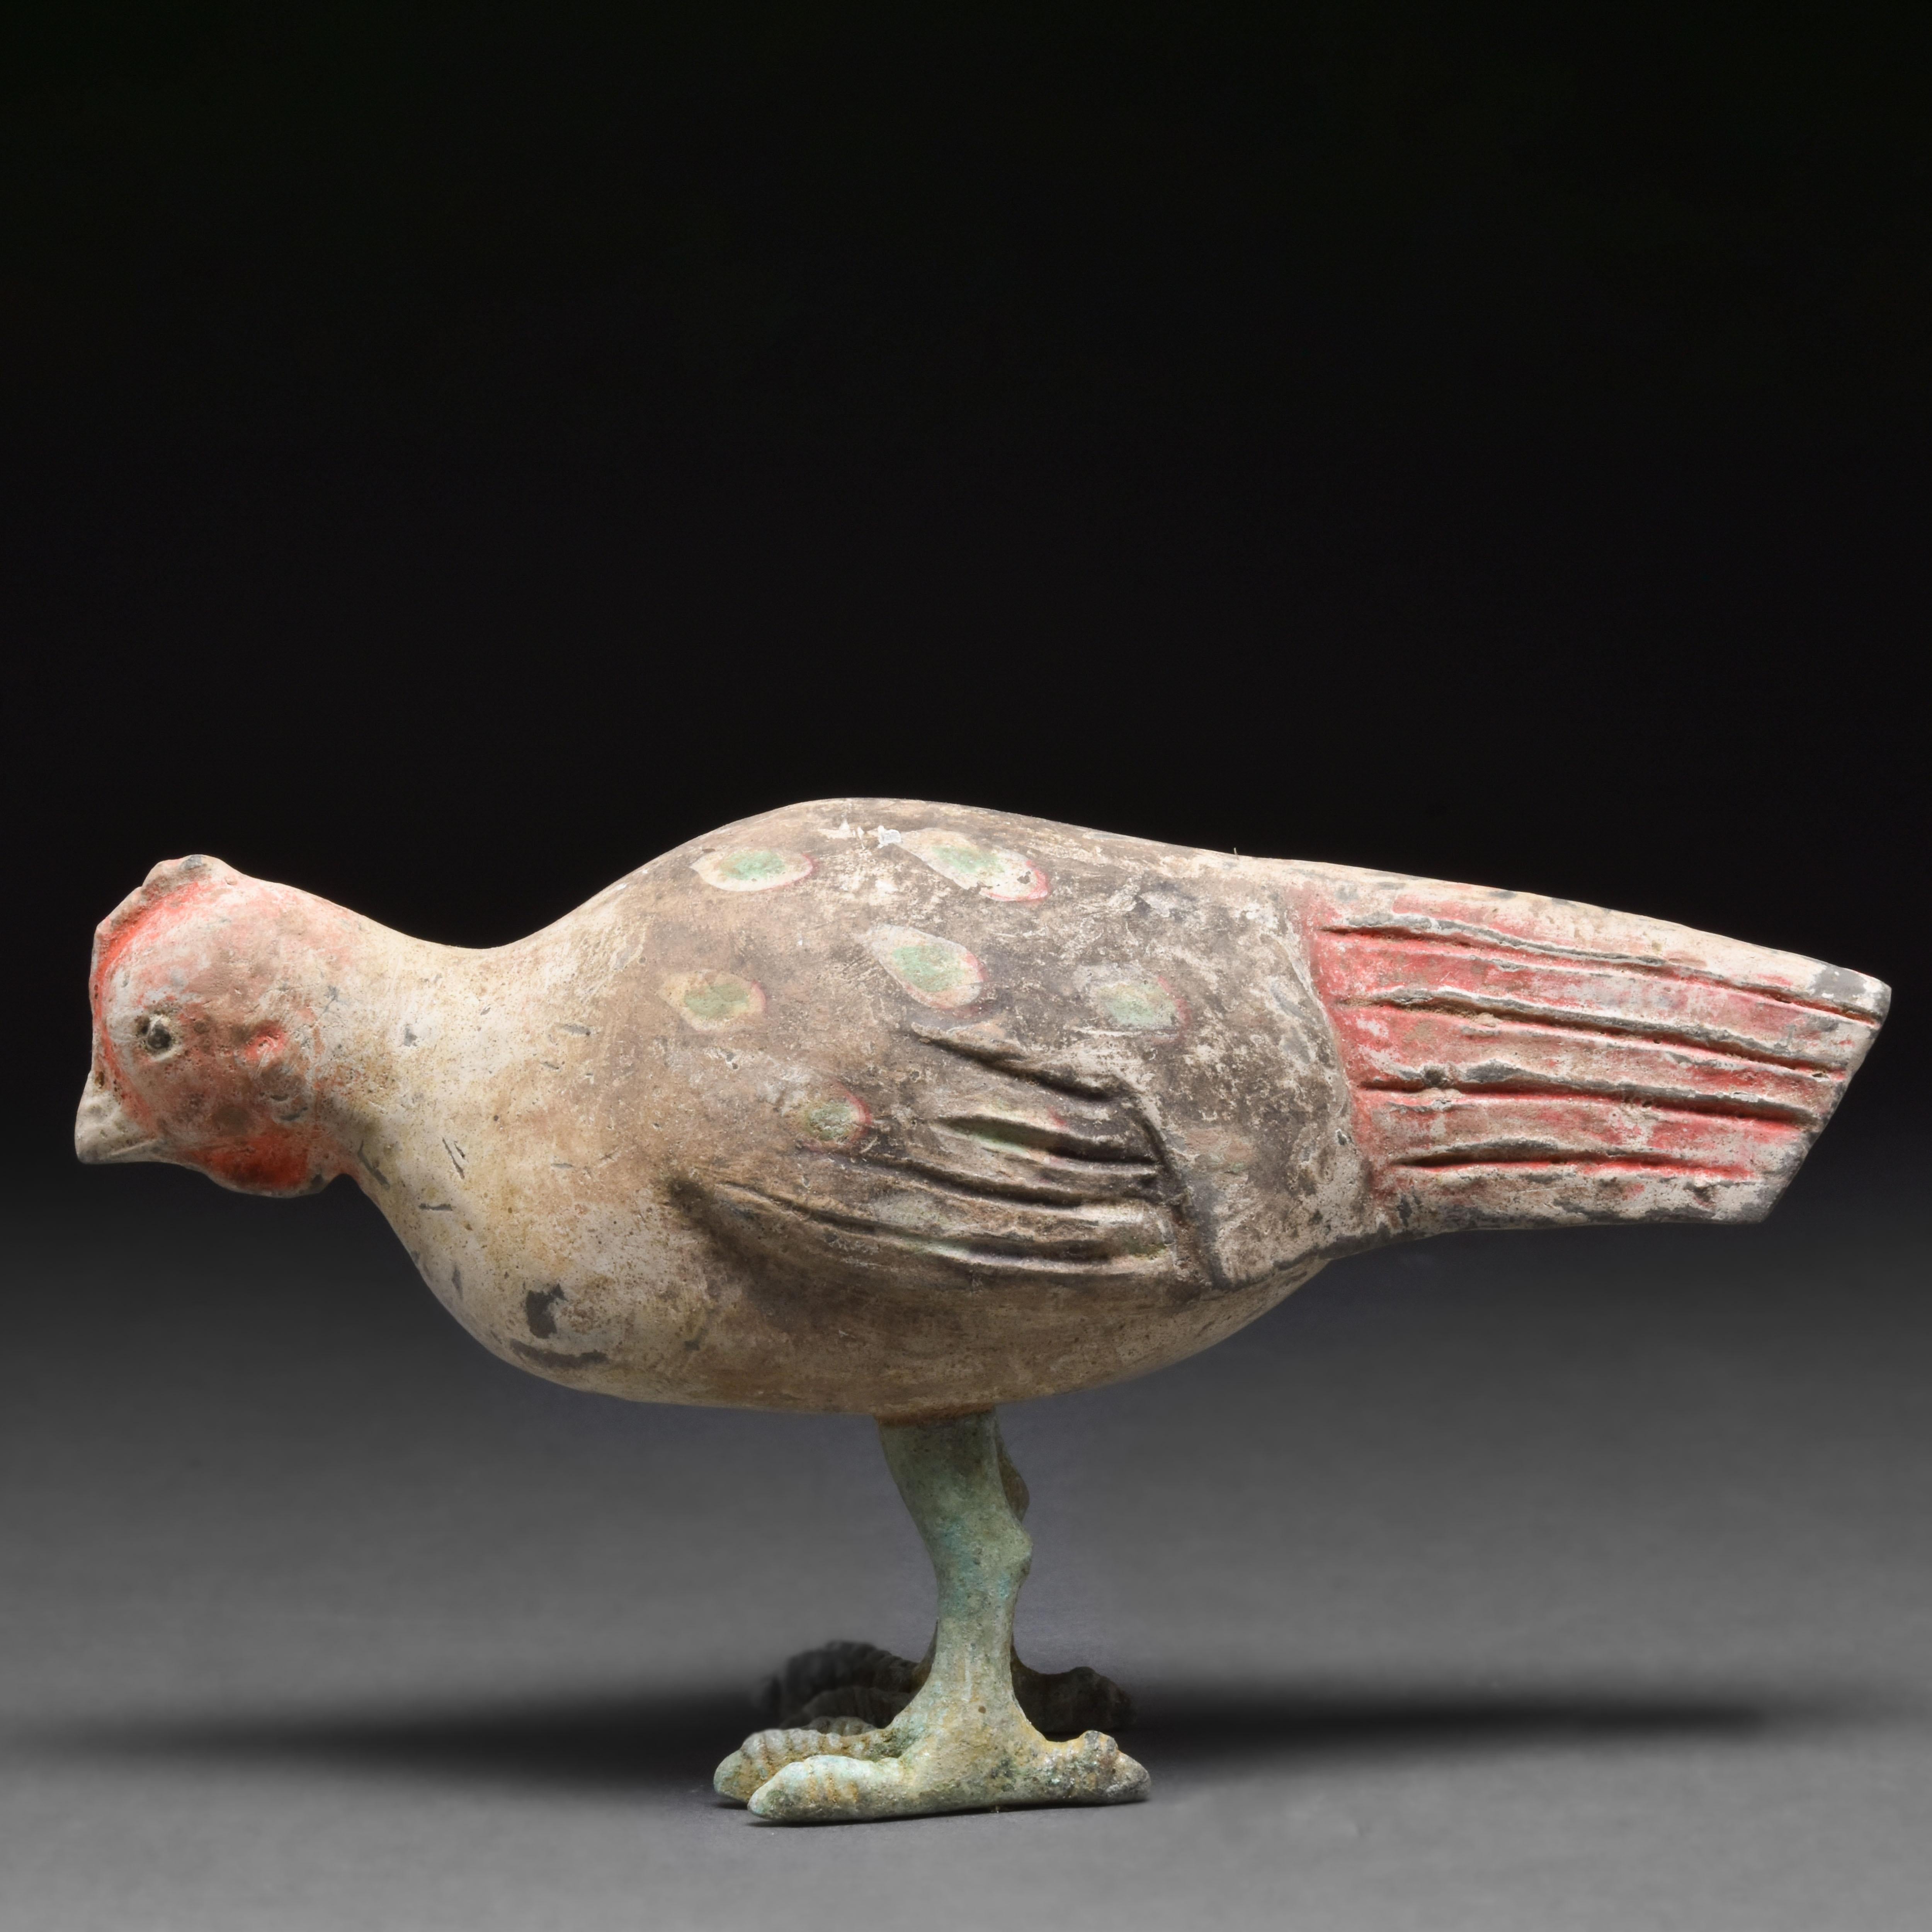 A beautiful terracotta bird that stands on a pair of well-defined bronze legs with large, splaying feet. These support a globular body and slender neck, stretched forwards. The remaining pigment suggests that the bird has a black body painted with